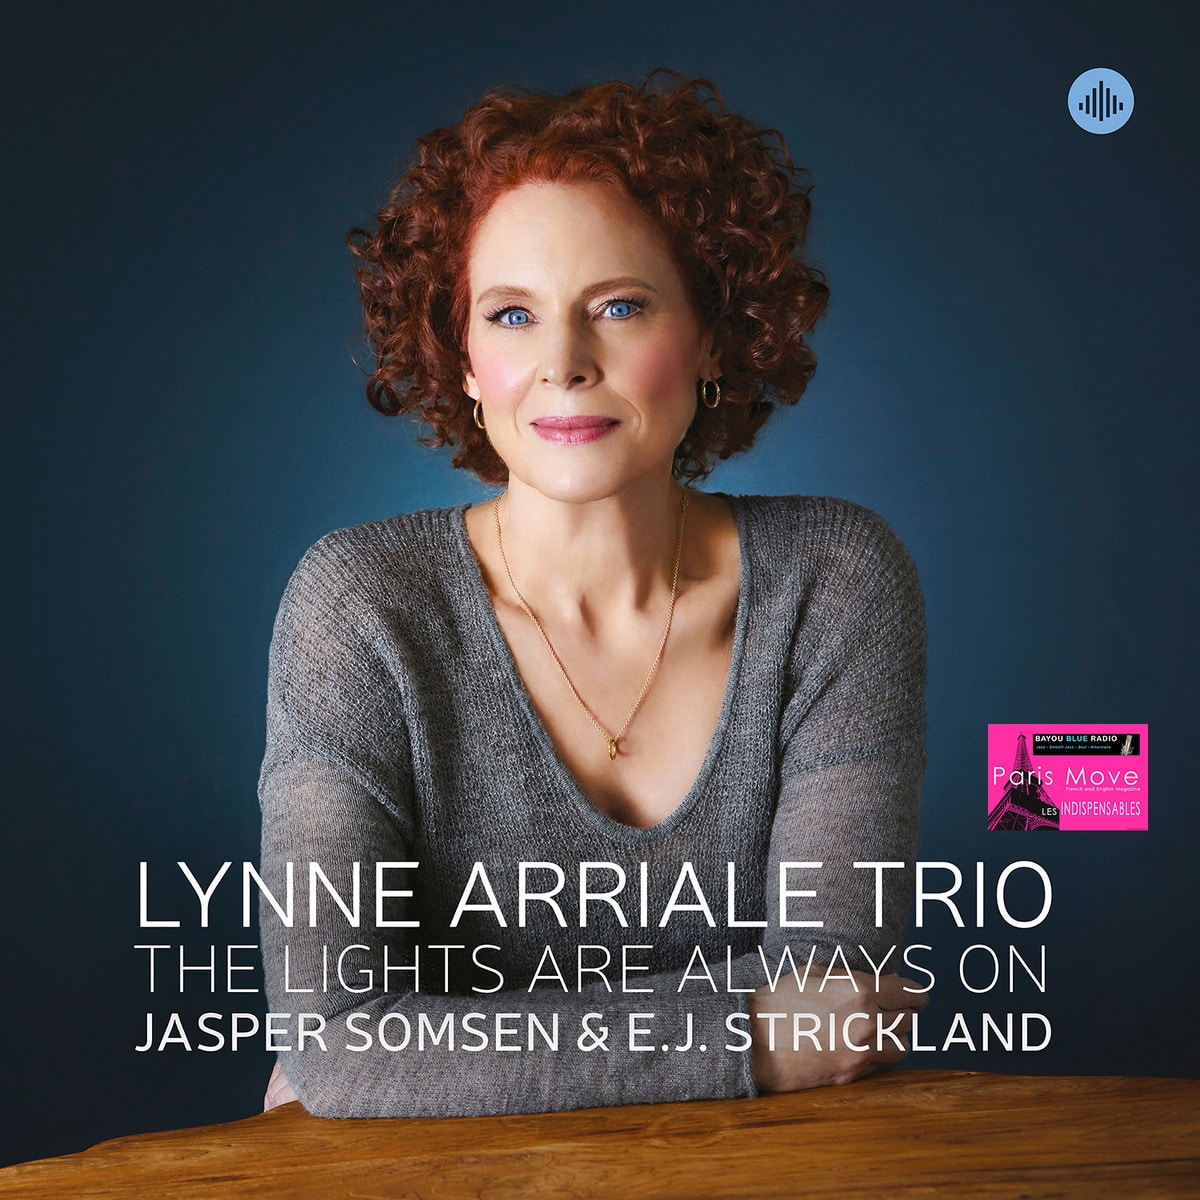 Lynne Arriale Trio – The Lights are always on